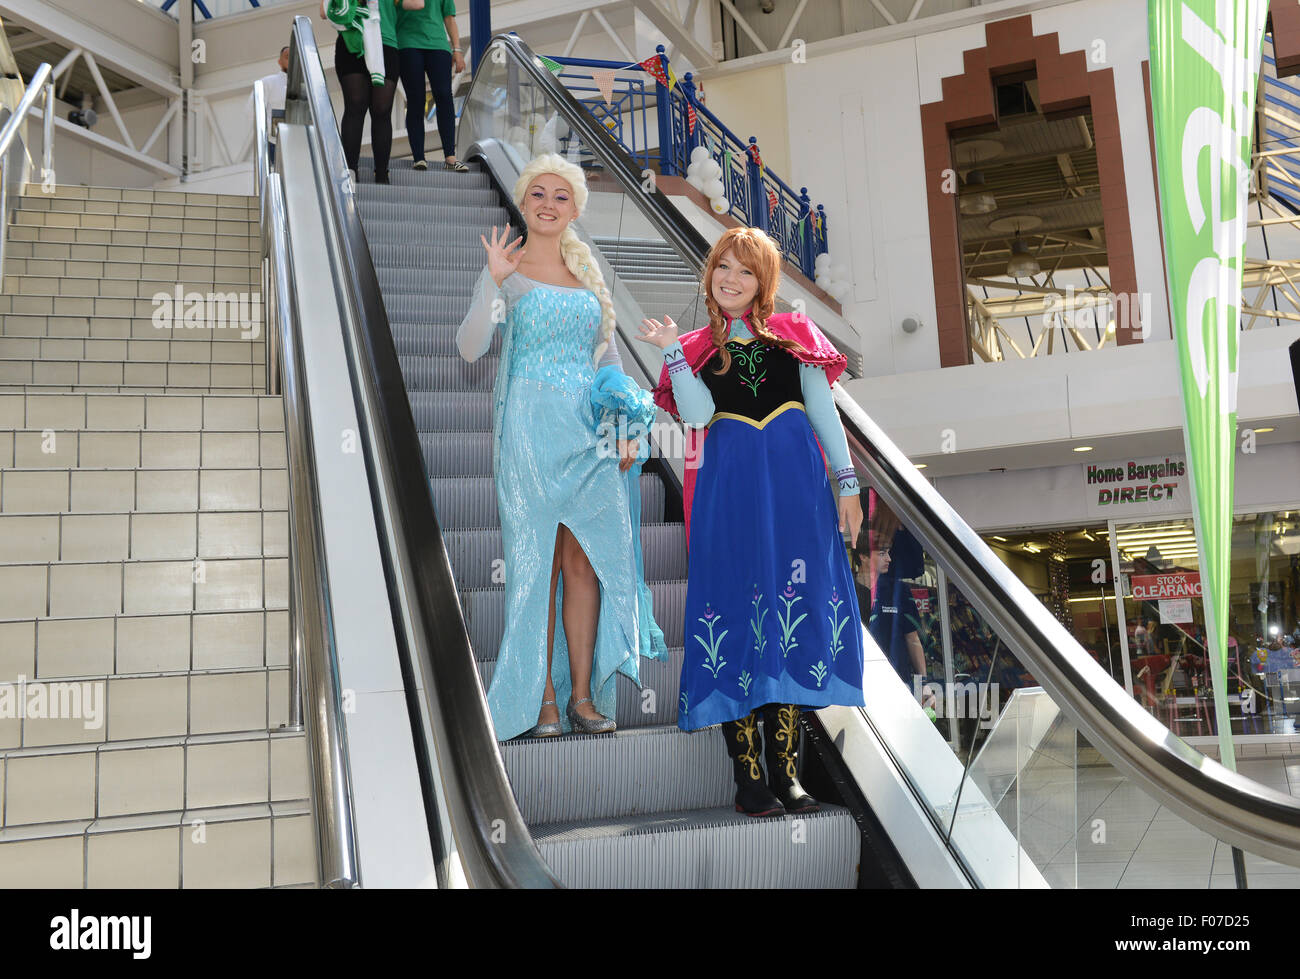 Disney Frozen characters Anna & Elsa at The Old Square shopping centre Walsall Stock Photo